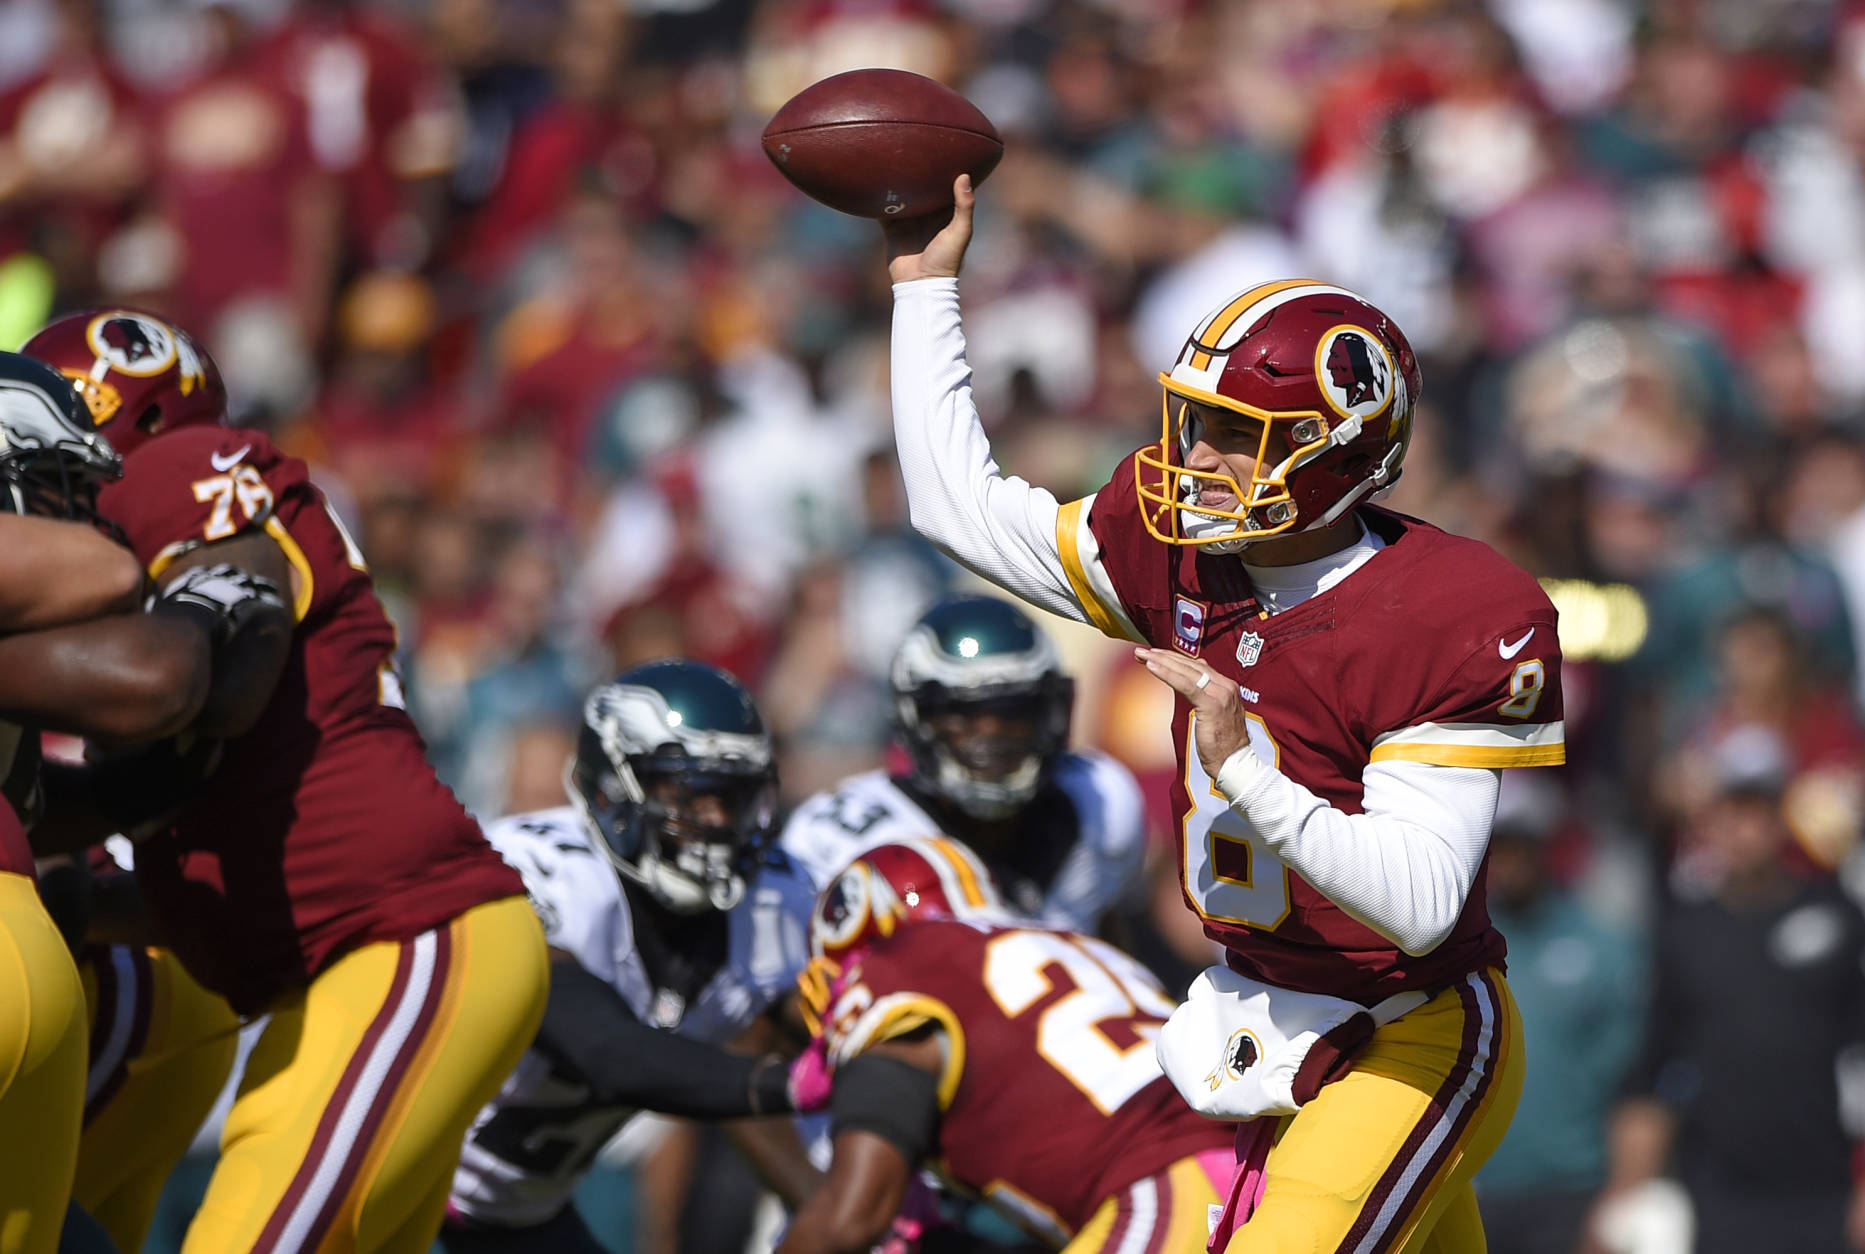 Washington Redskins quarterback Kirk Cousins throws to a receiver in the first half of an NFL football game against the Philadelphia Eagles, Sunday, Oct. 16, 2016, in Landover, Md. (AP Photo/Nick Wass)